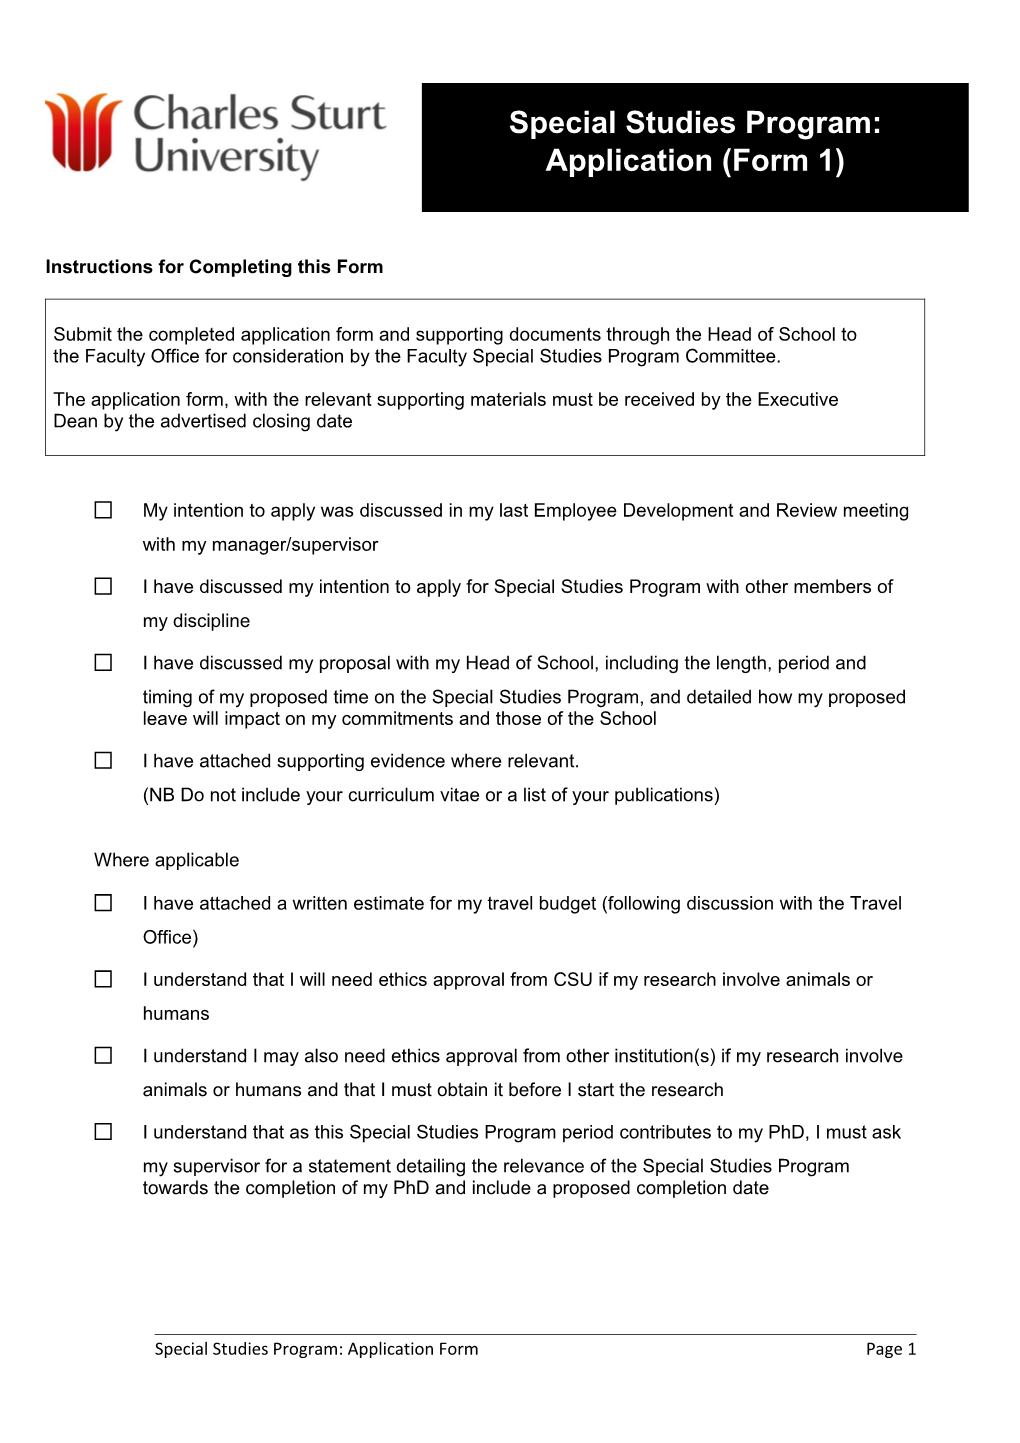 Instructions for Completing This Form